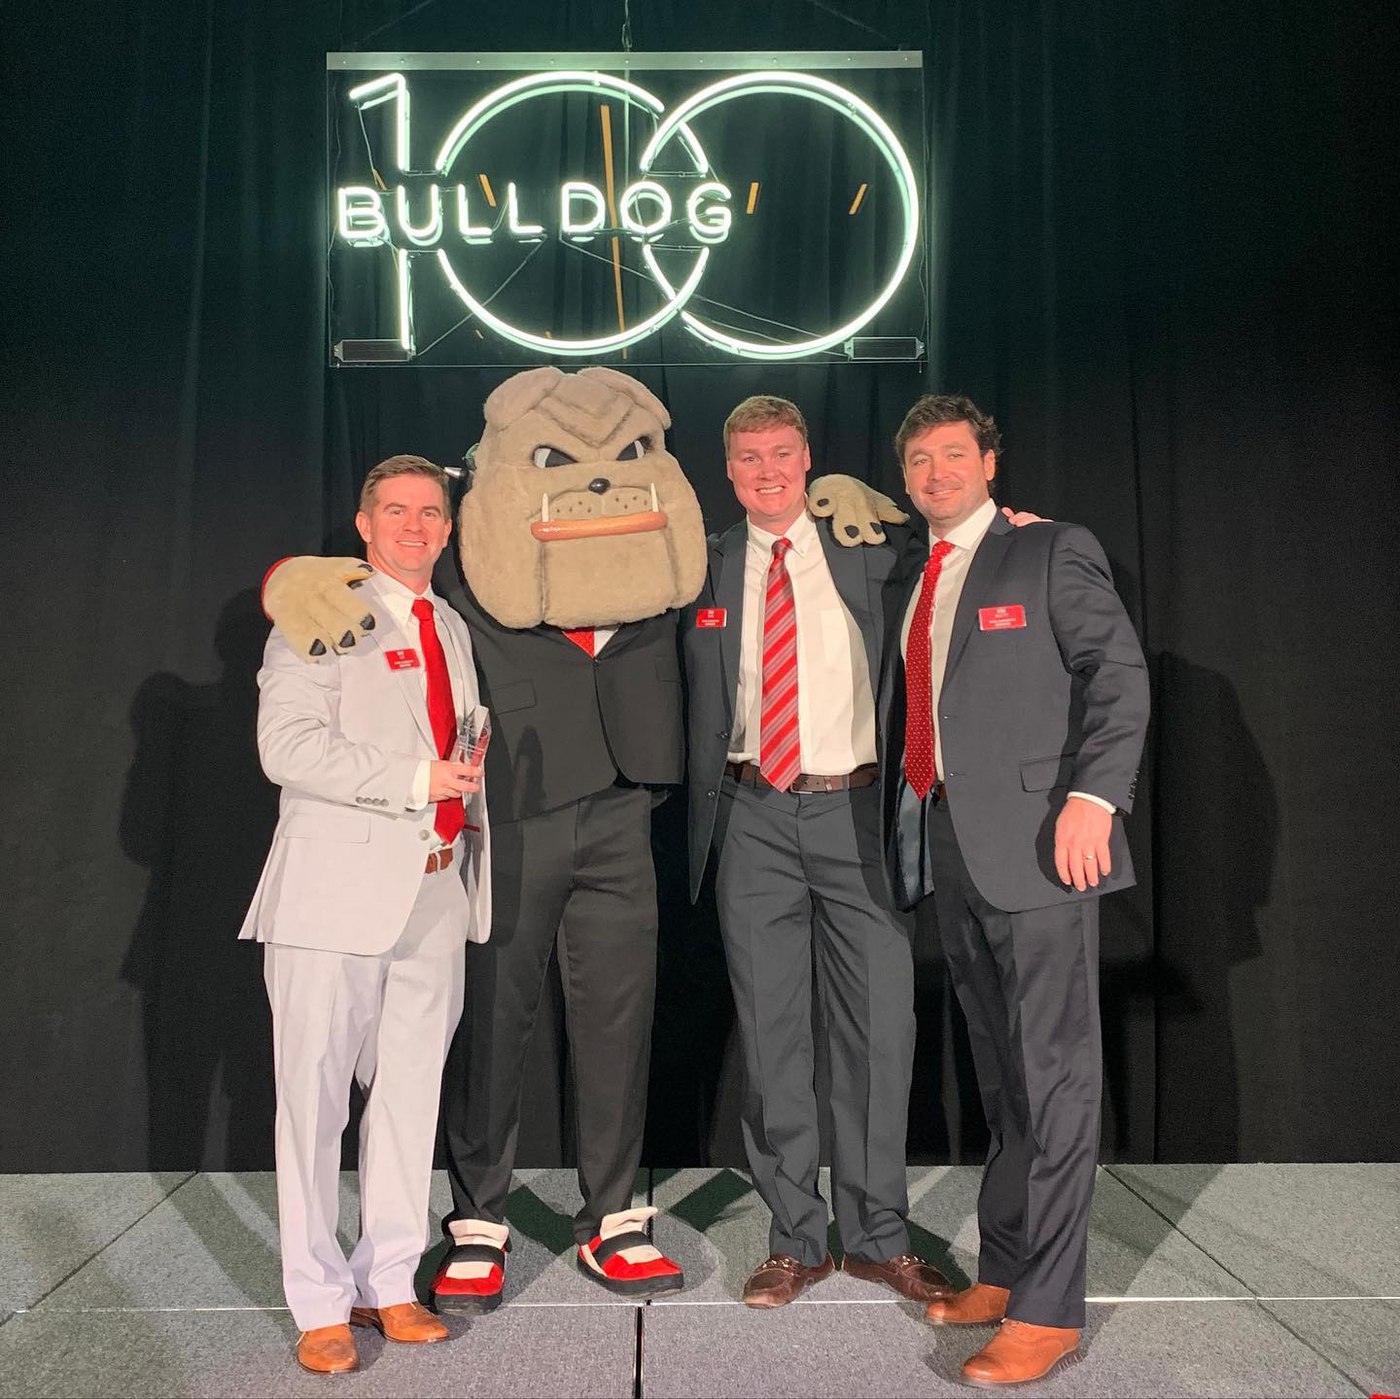 Dental ClaimSupport Recognized as #42 on the 2020 Bulldog 100 Fastest Growing Businesses